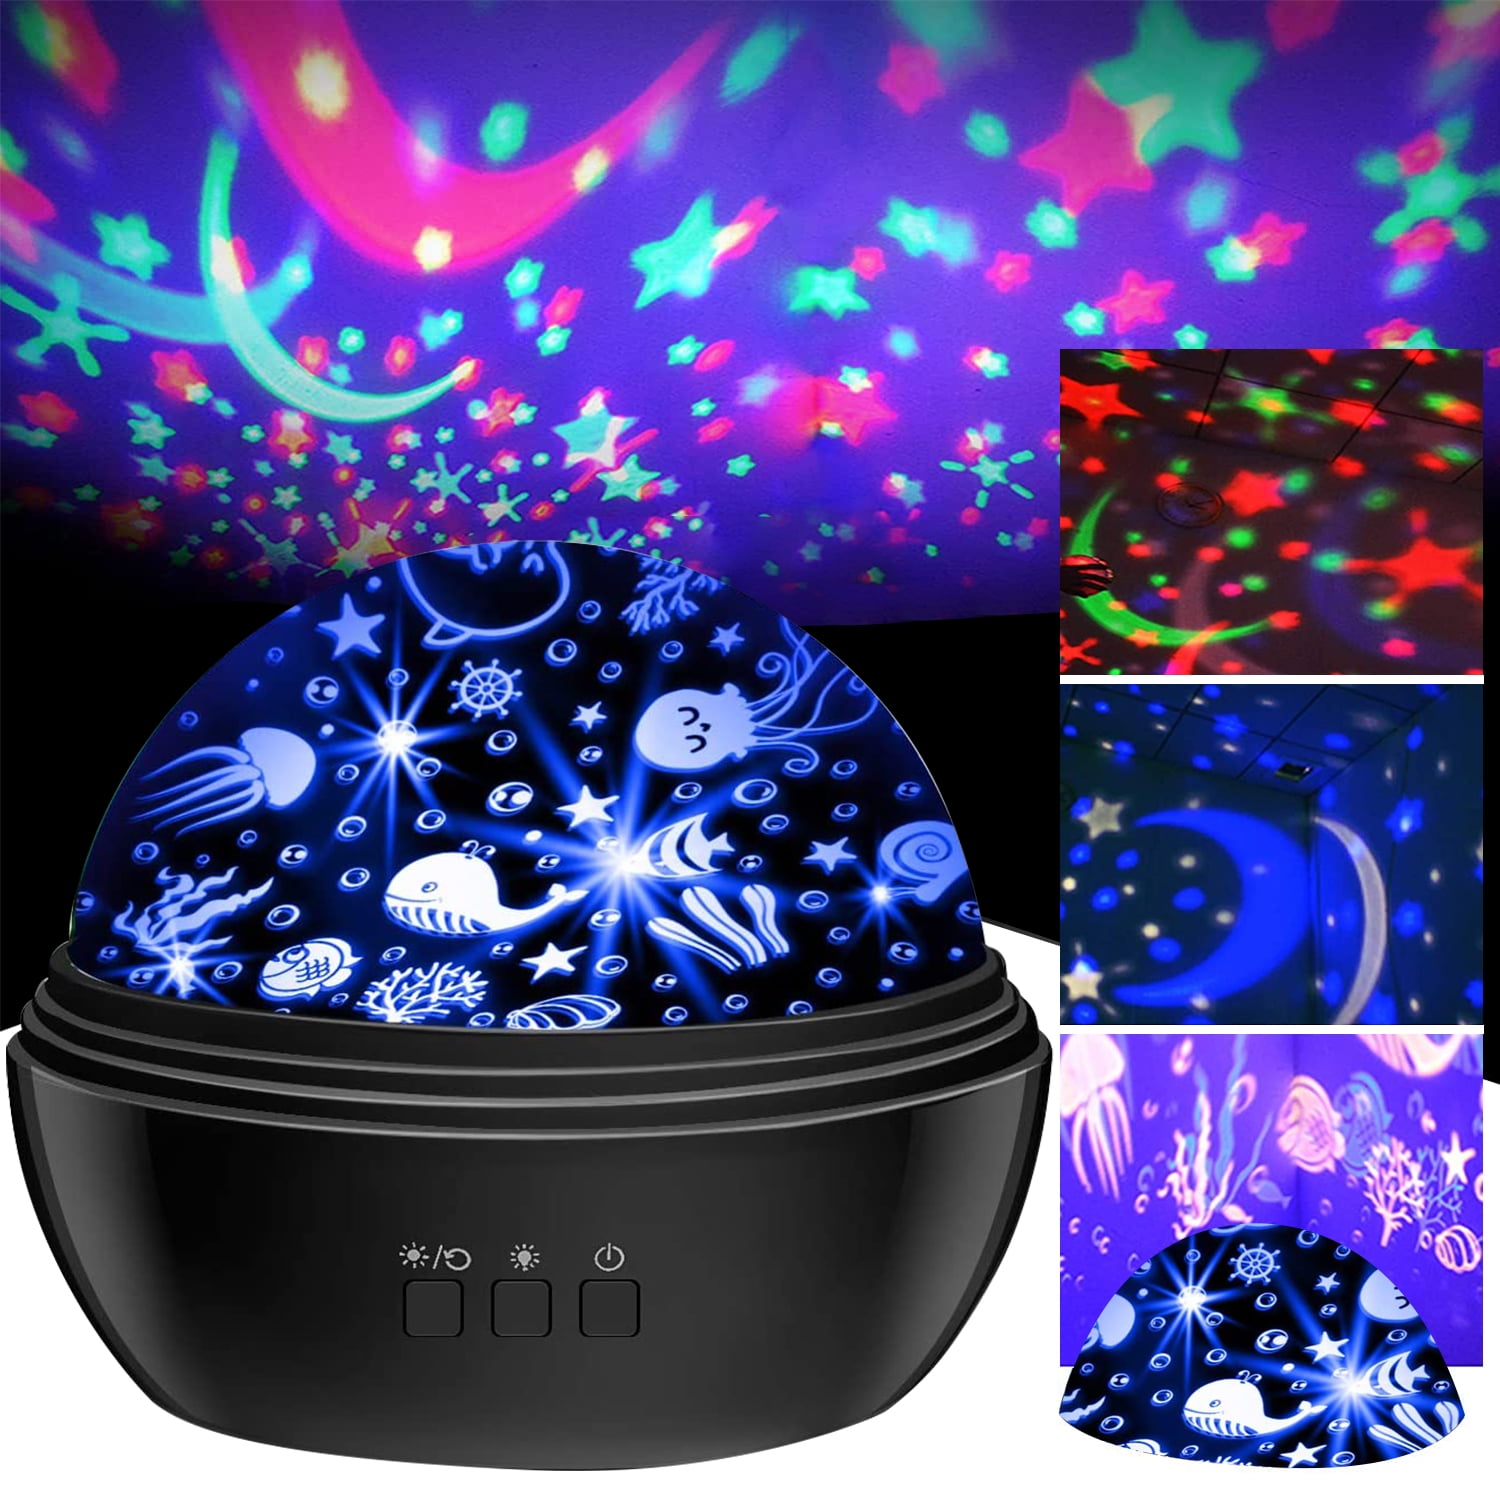 Kids Star Night Light Desk Lamp 4 LEDs 8 Colors Changing with USB Cable and Battery Best for Children Baby Bedroom 360-Degree Rotating Star Projector Unique Gift for Birthday 